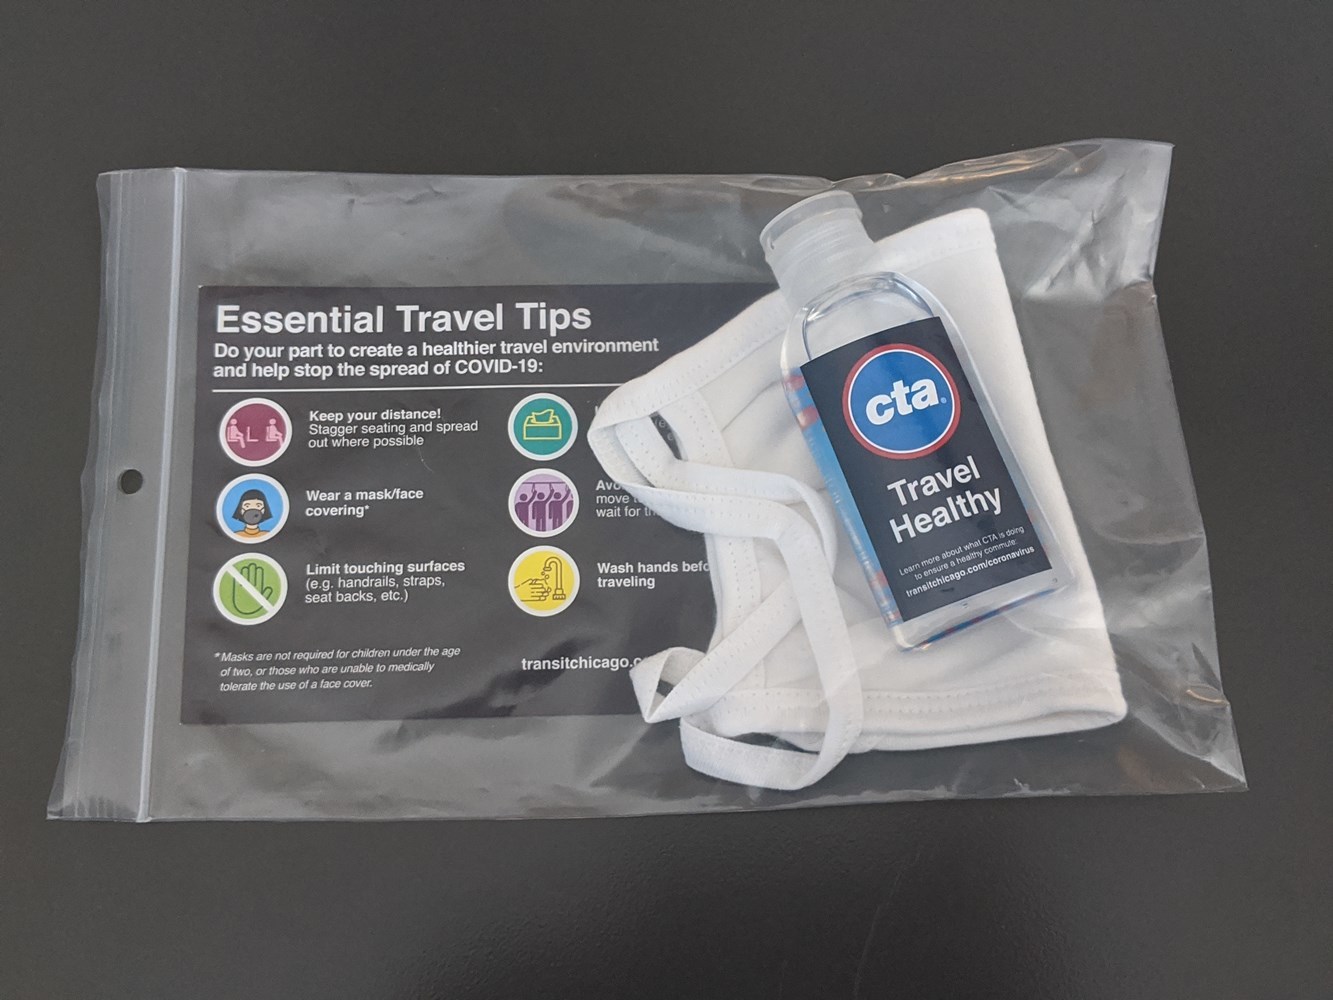 Sample CTA Travel Healthy kit featuring a reusable cloth mask, hand sanitizer and essential travel tips